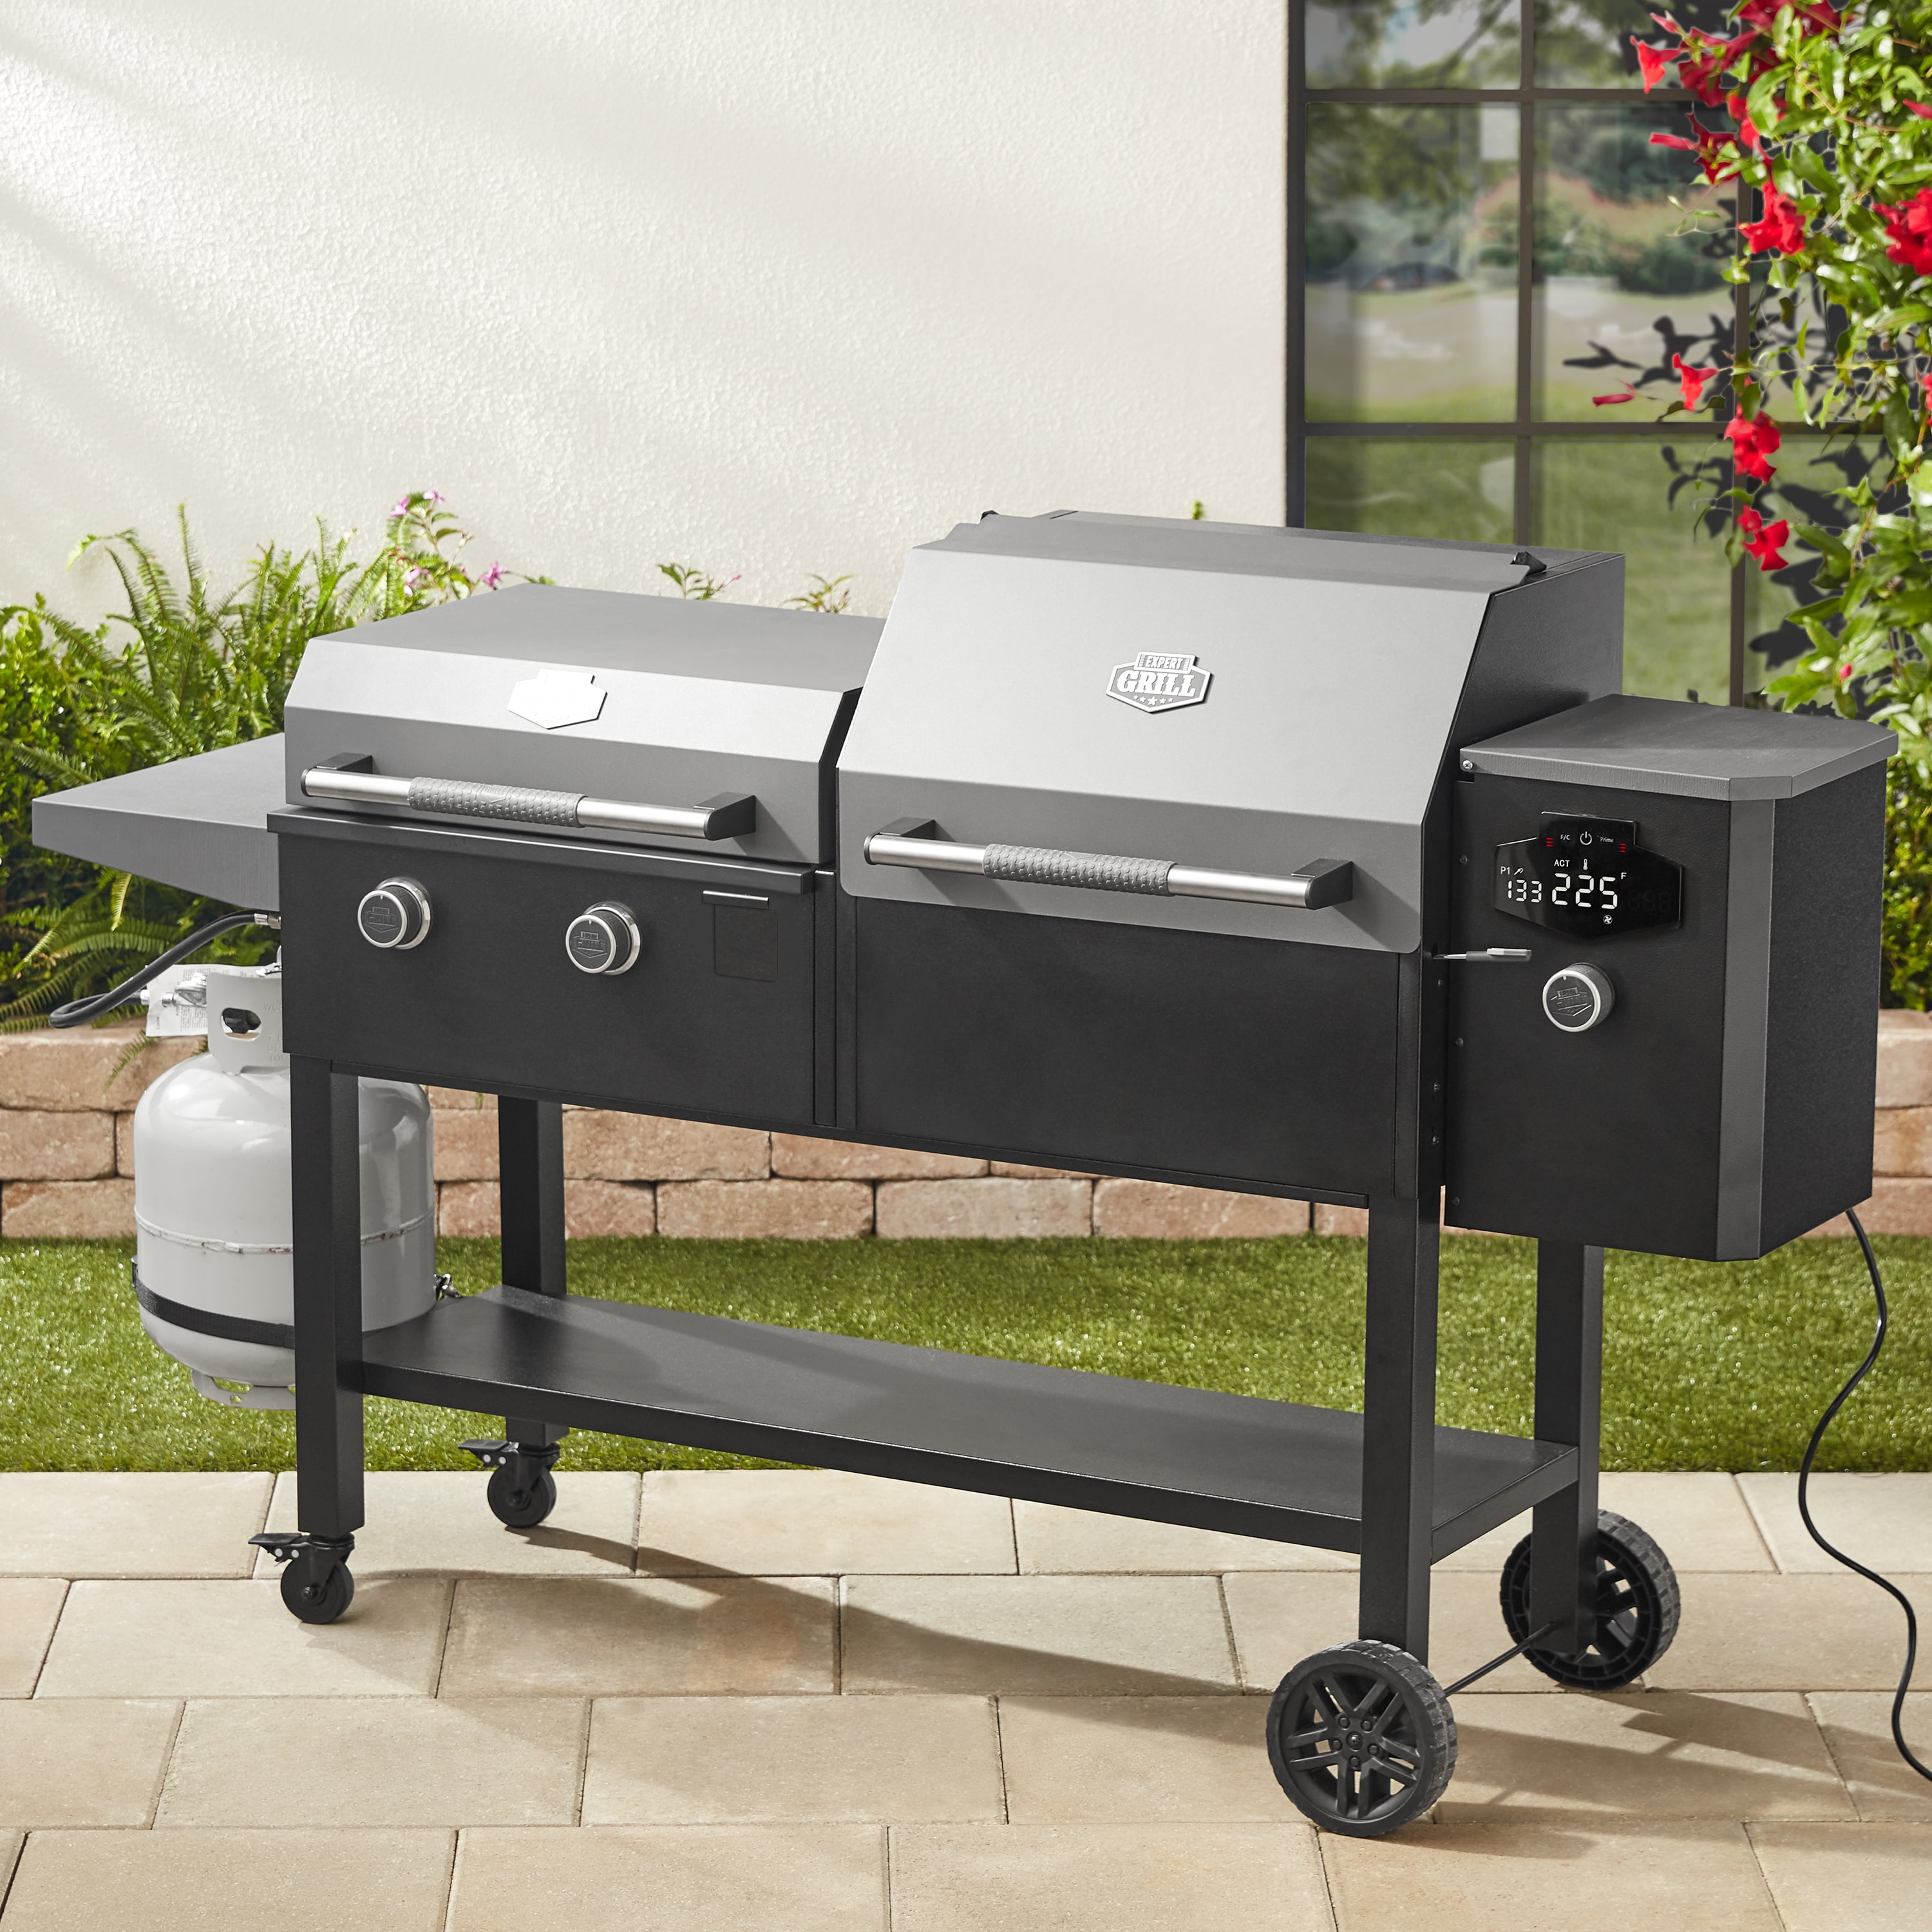 Smoker Grill: 5 Expert-Backed Options, with Pros & Cons